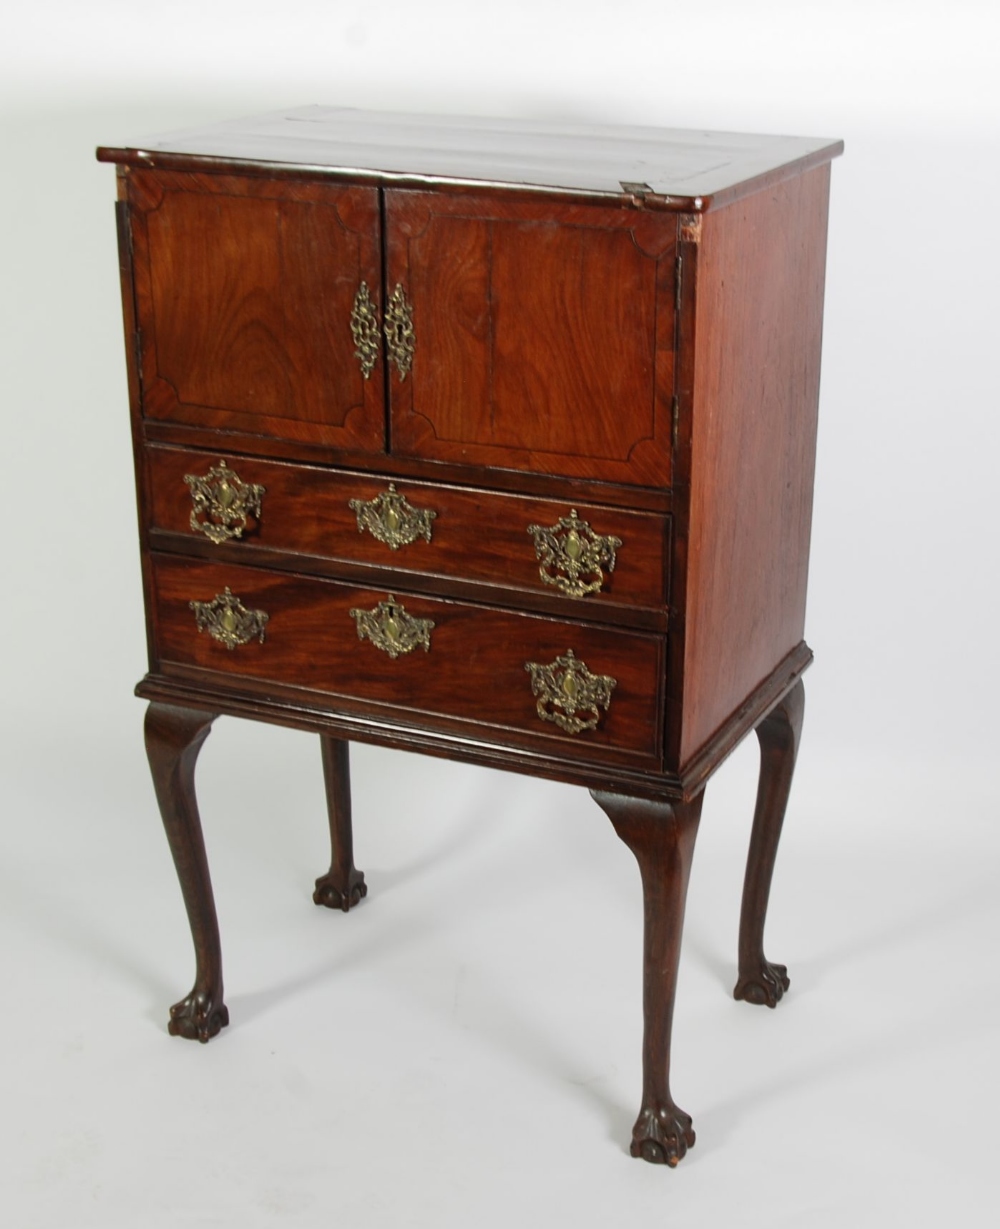 GEORGIAN AND LATER COMPOSITE MAHOGANY SIDE CABINET, the oblong cross banded top above a pair of